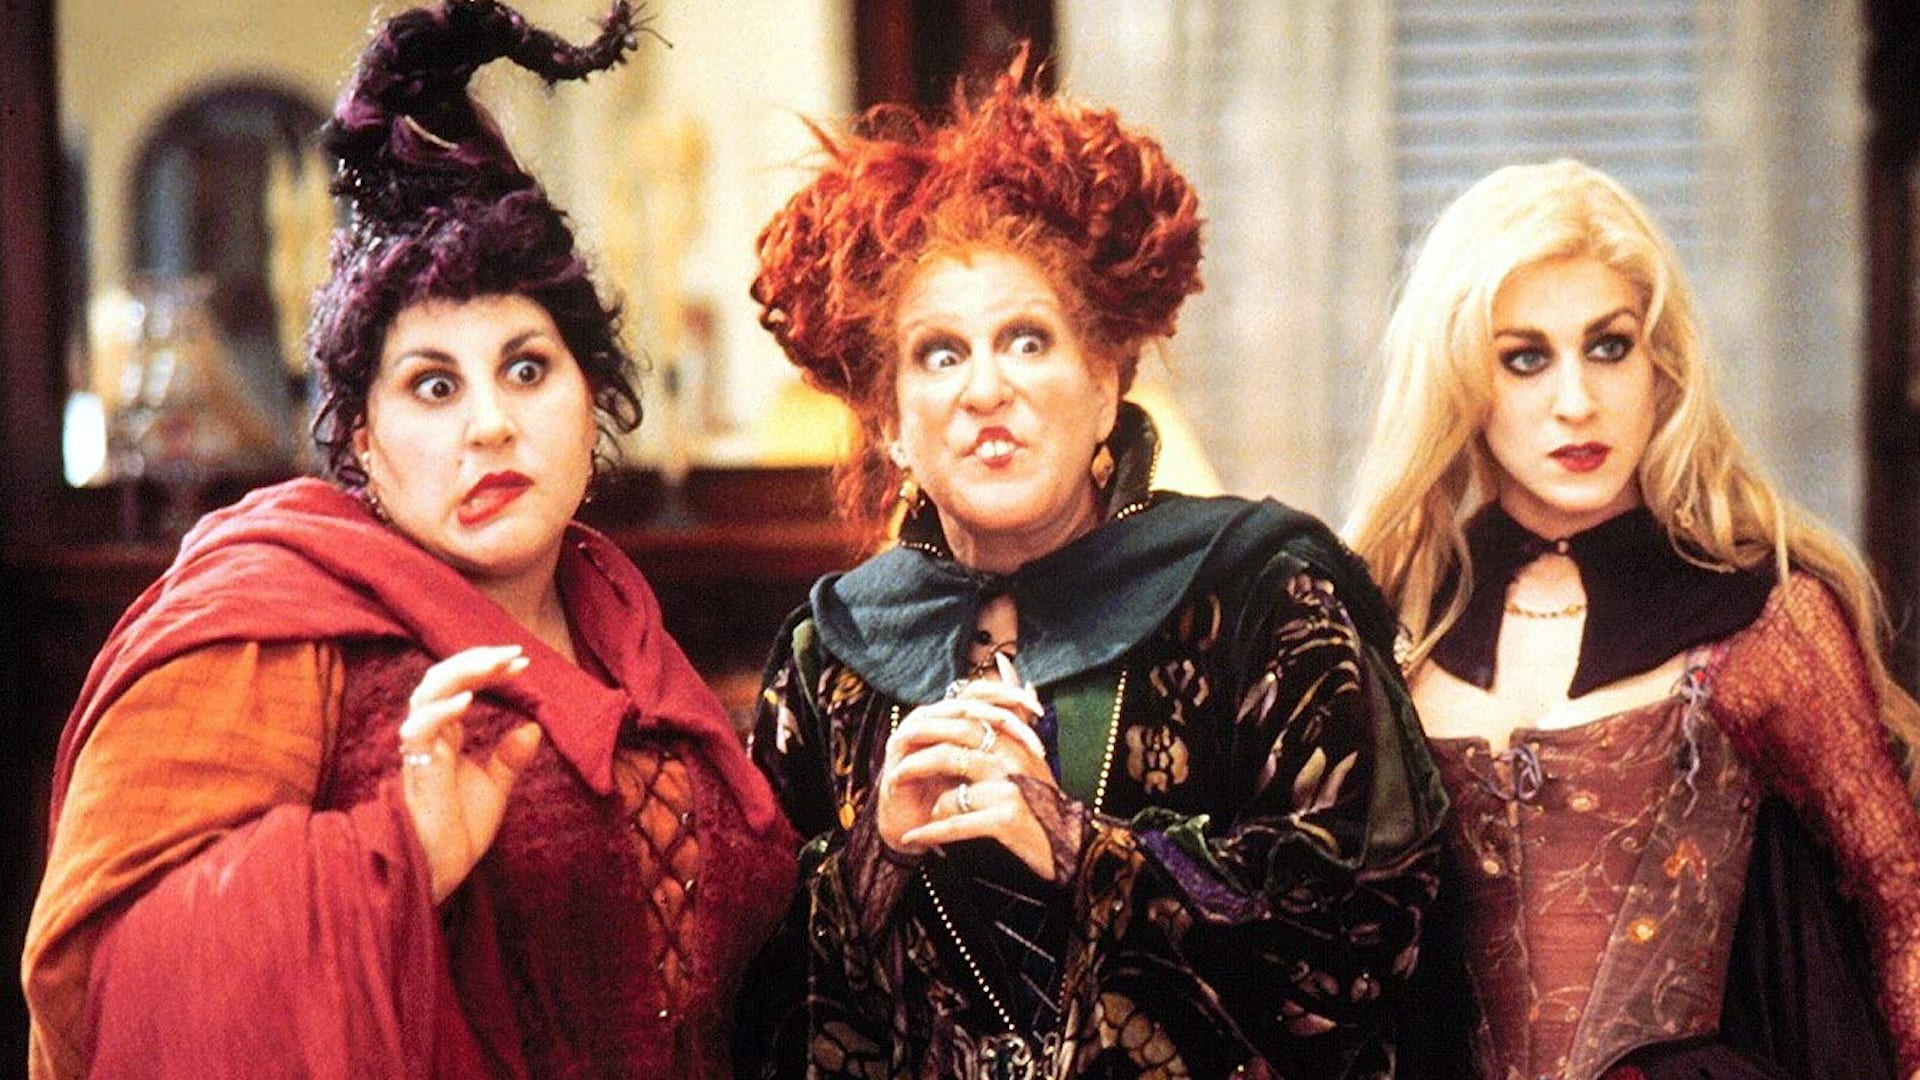 A screenshot of the film Hocus Pocus, featuring three witches